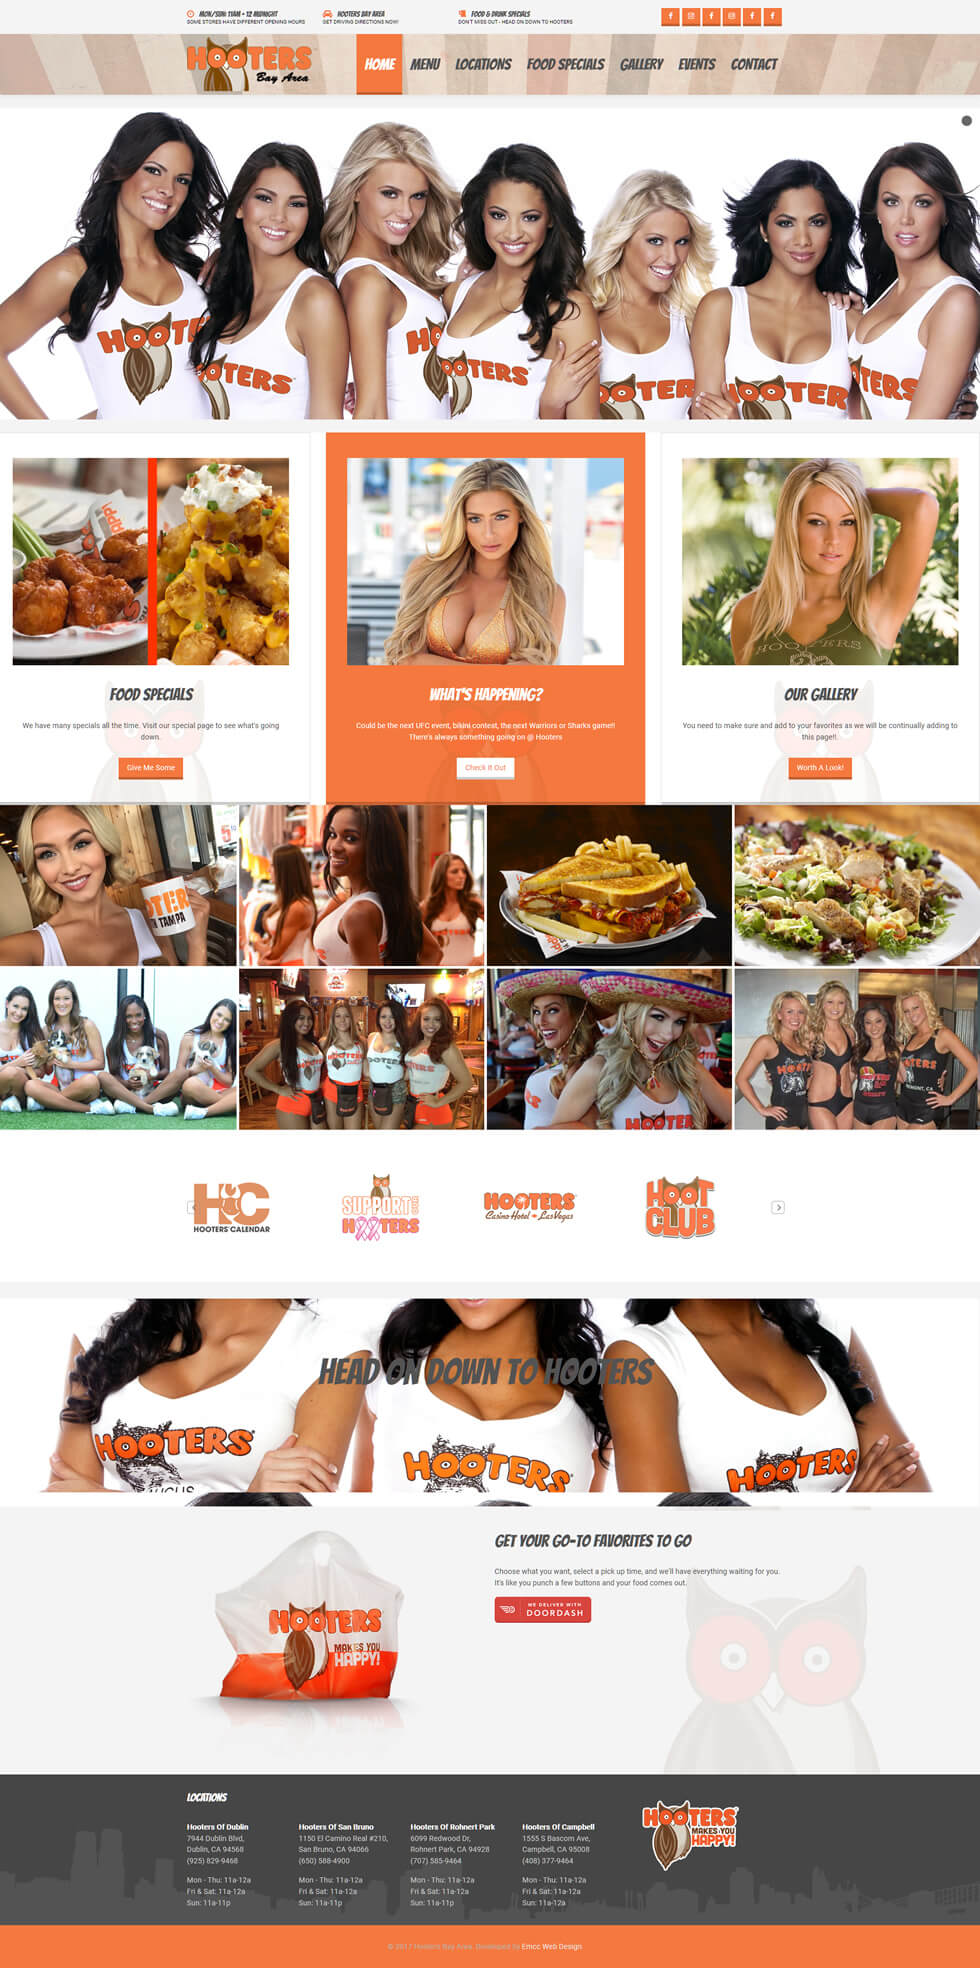 Socal Hooters Website - Designed by EMCC